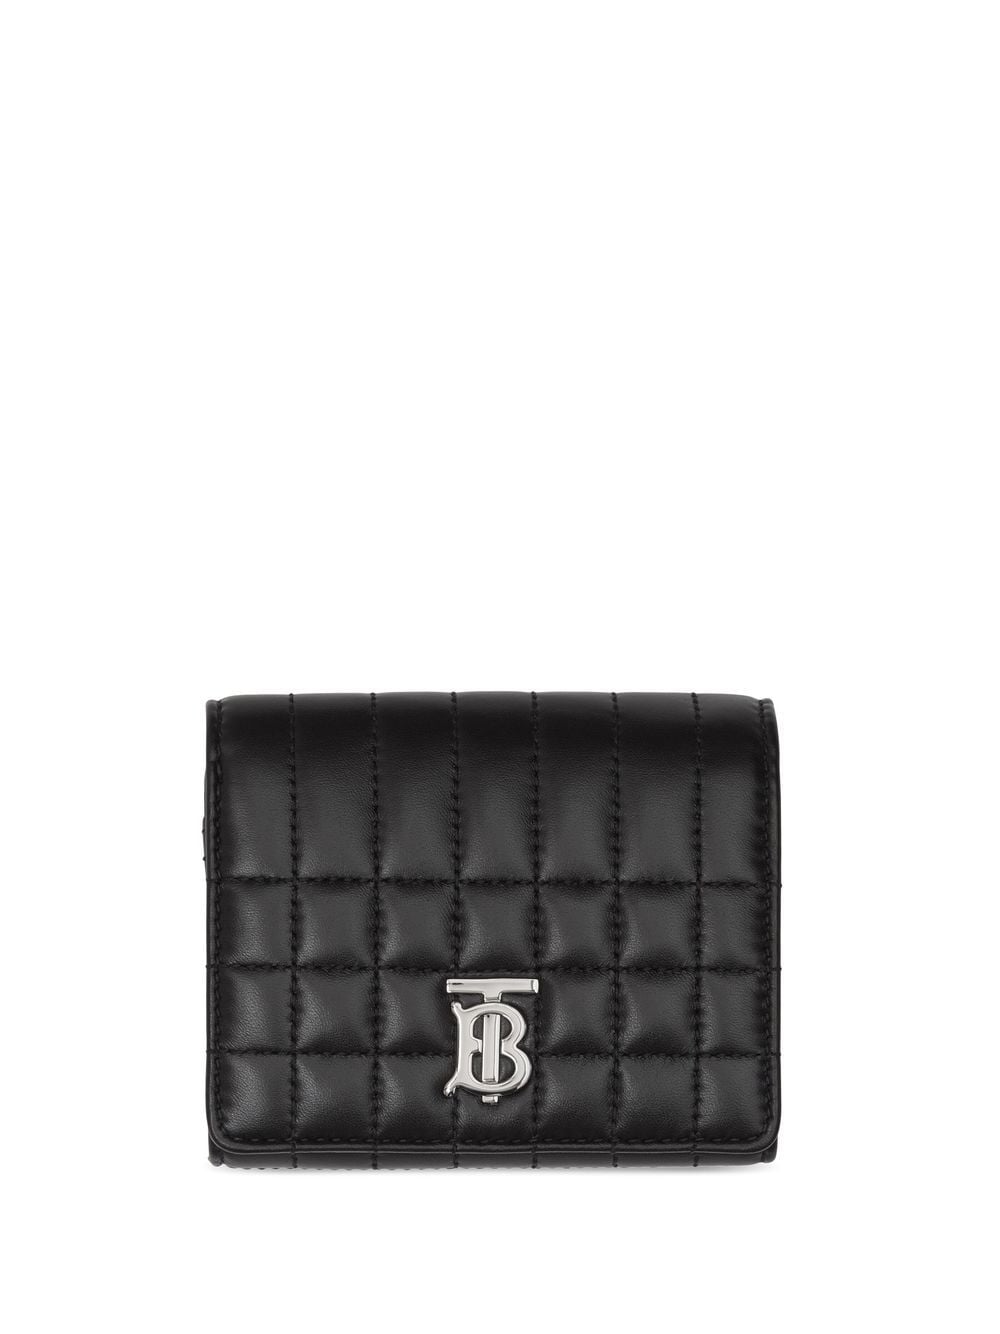 Burberry Lola quilted leather wallet - Black von Burberry